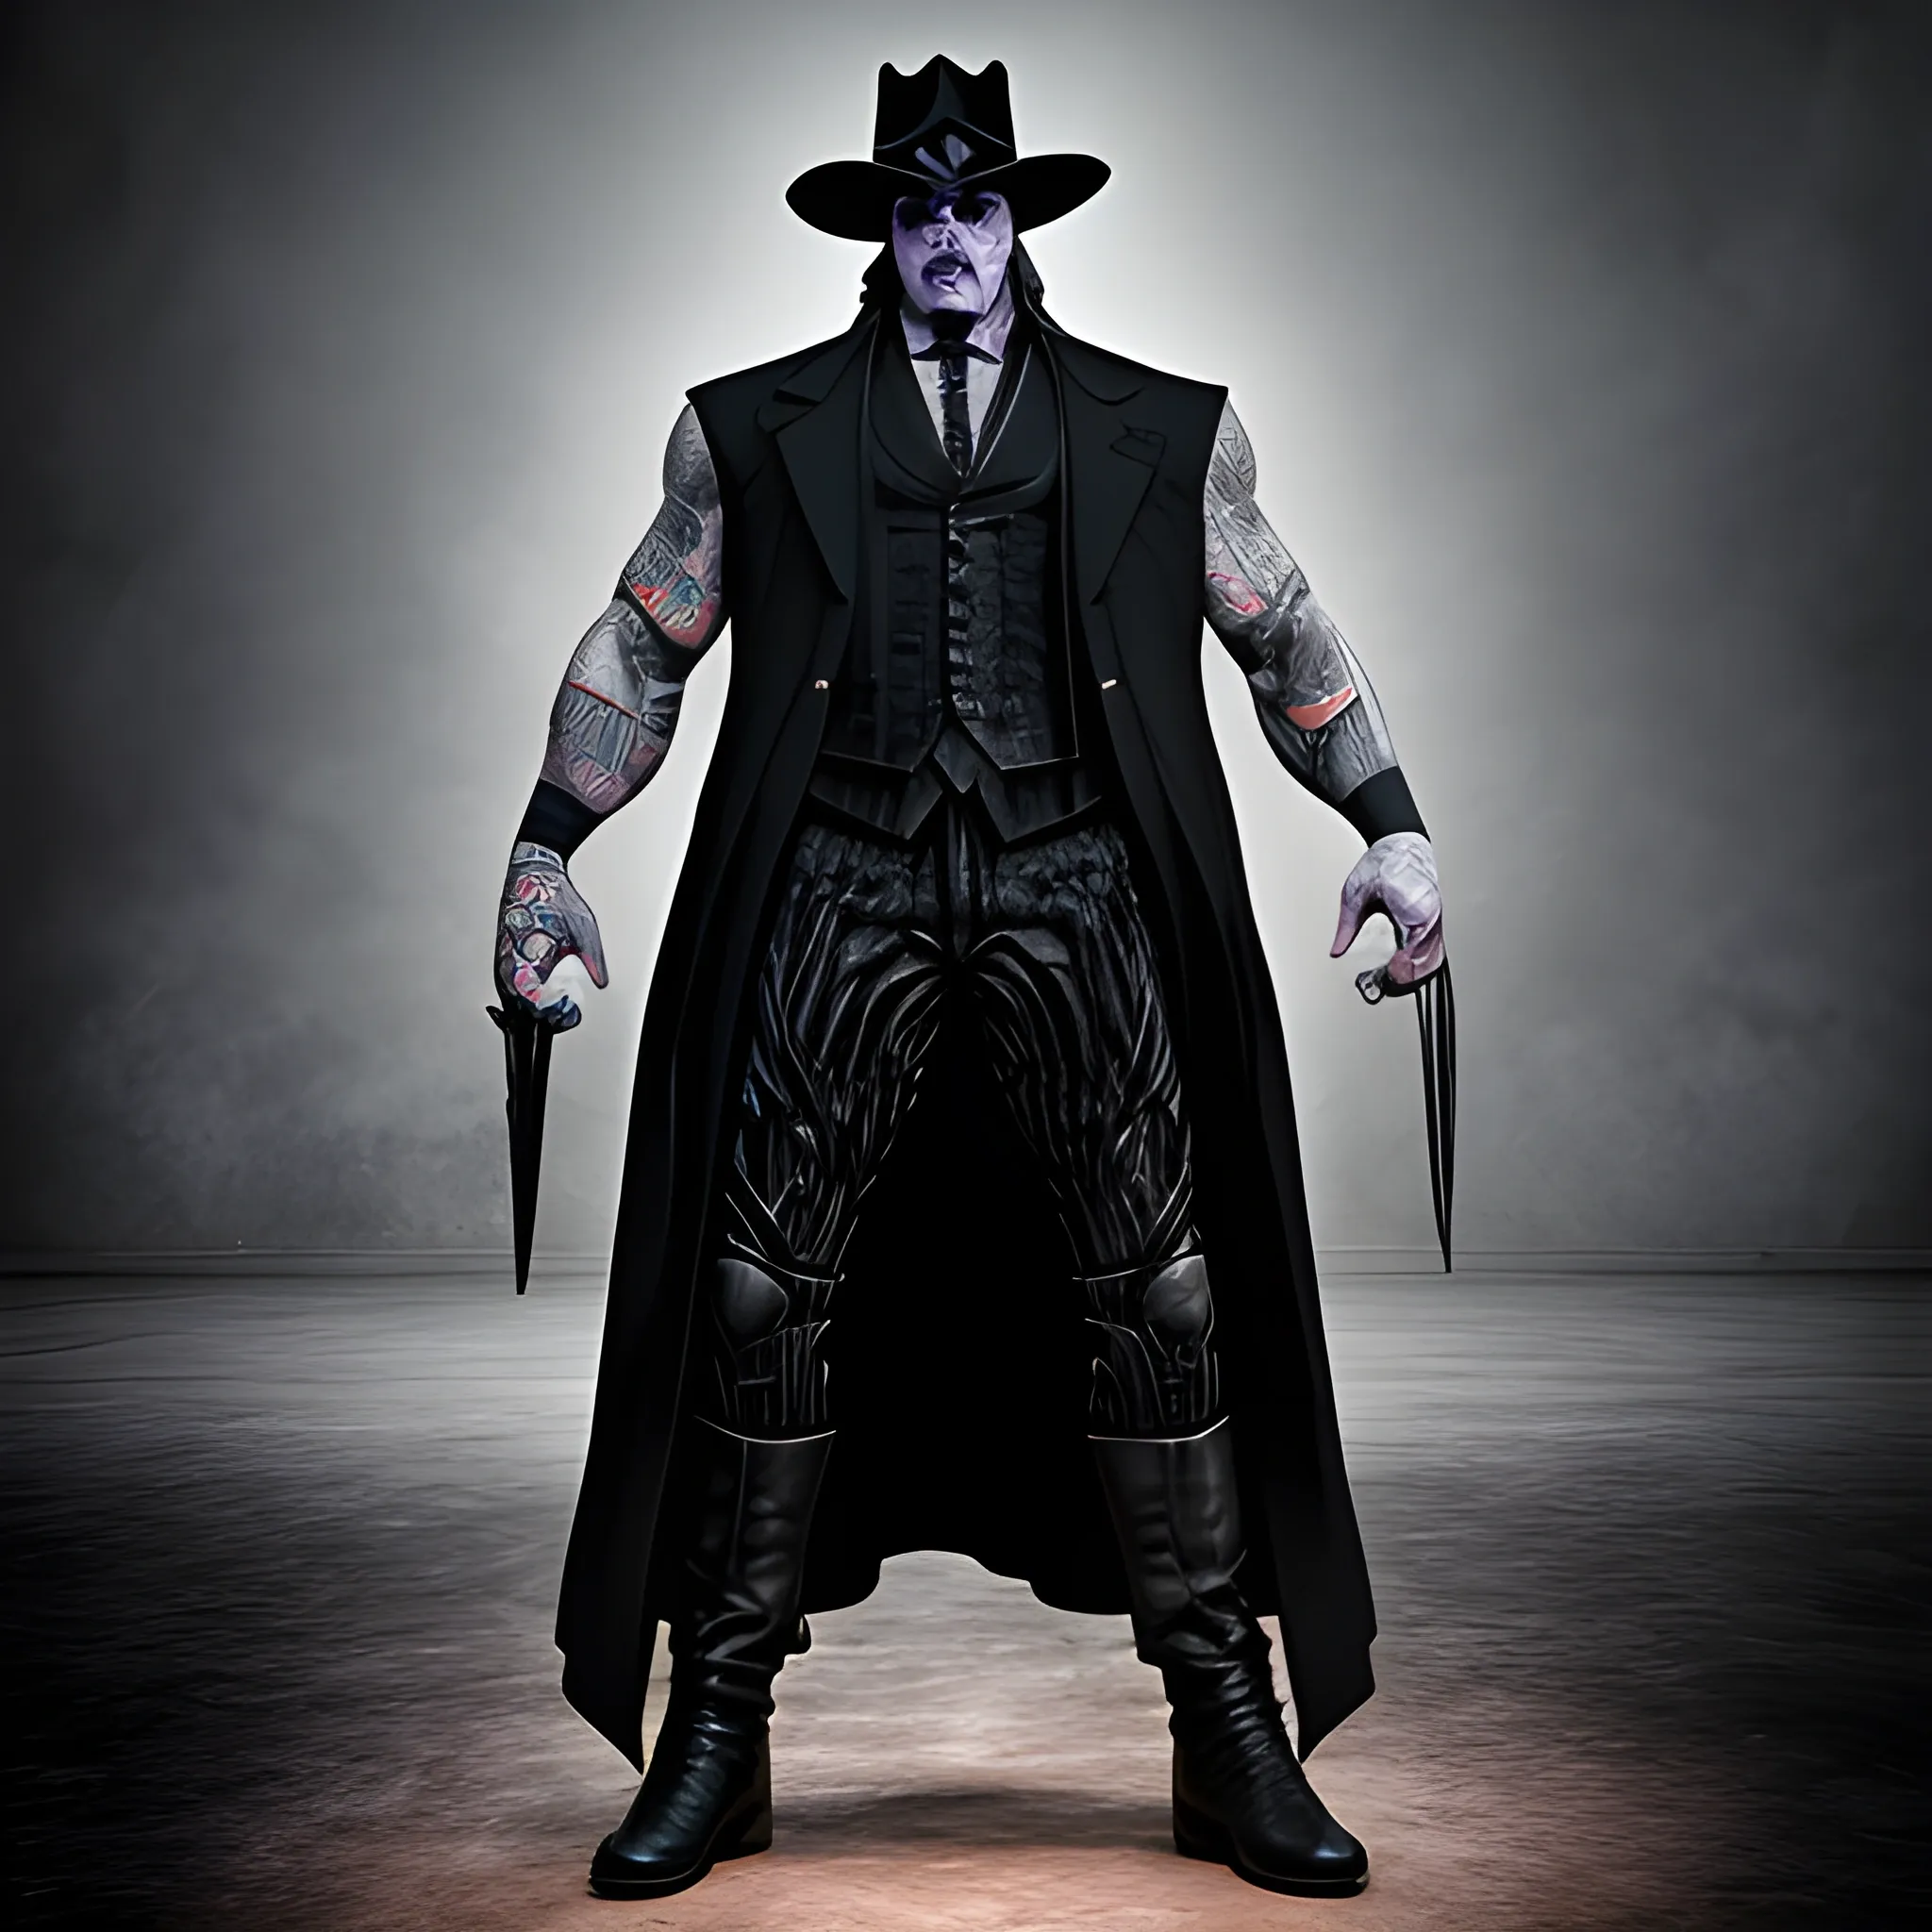 undertaker stands with his legacy 21 - 0
, 3D